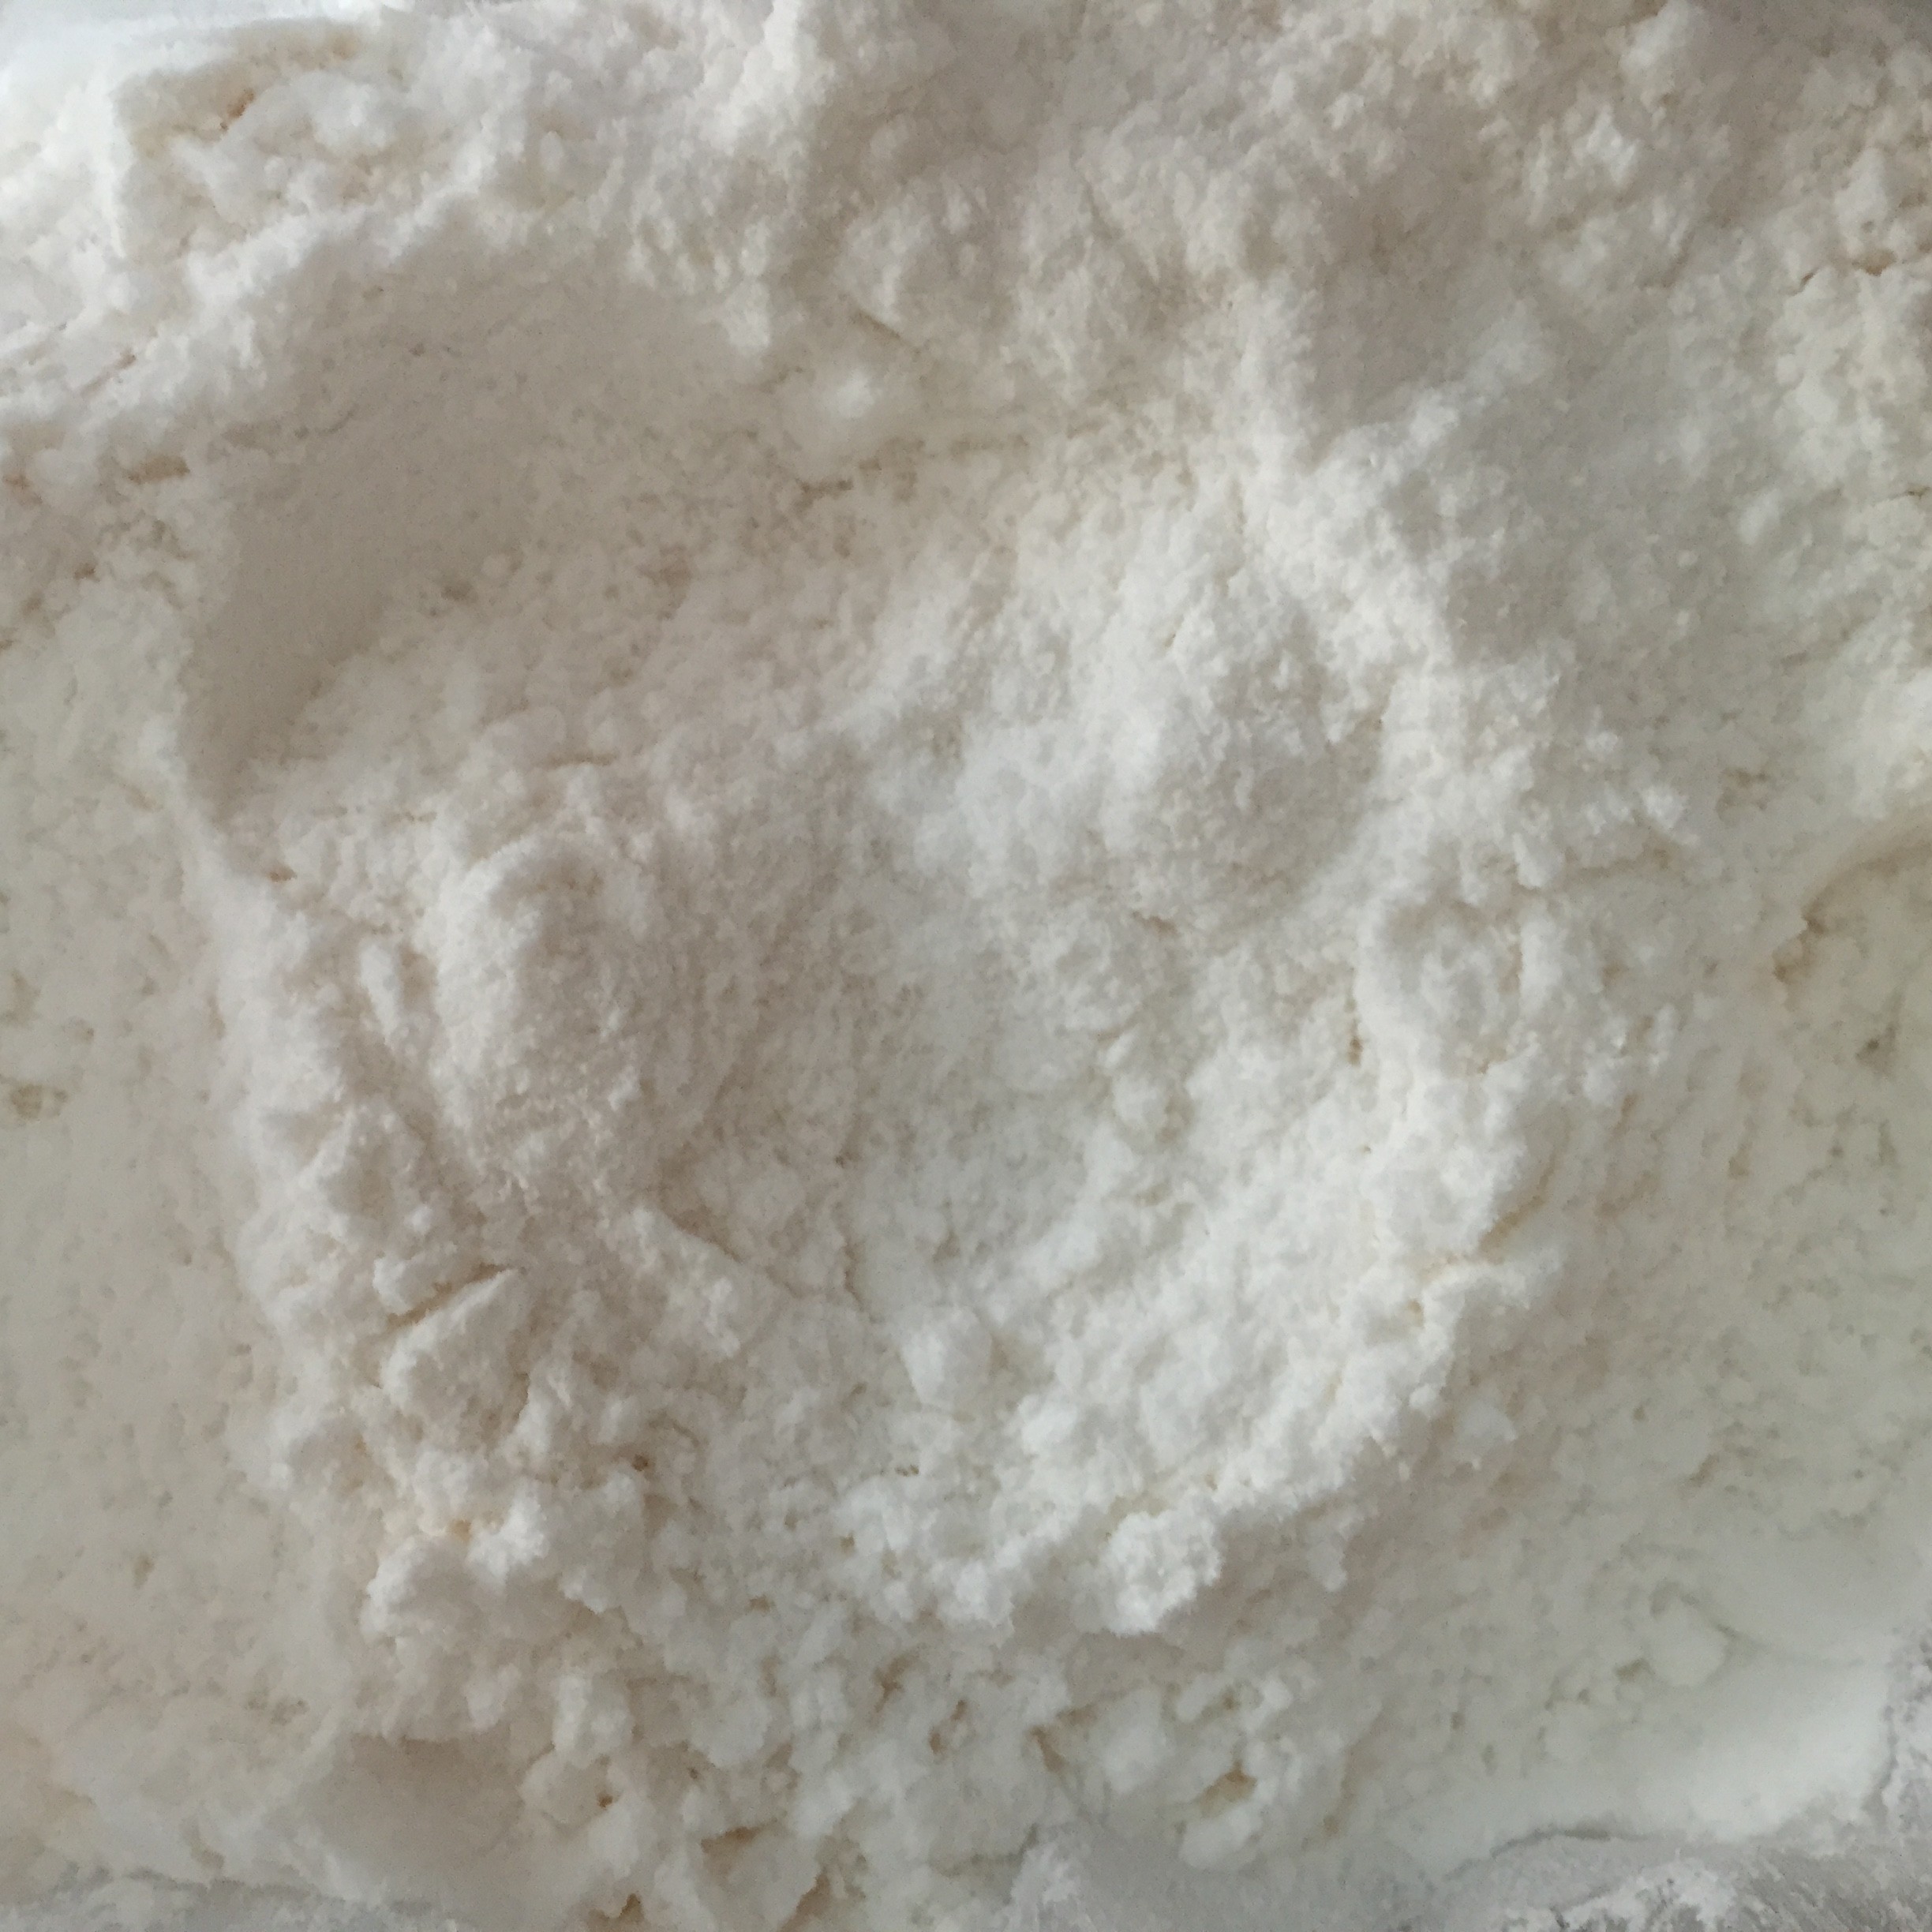 White Crystalline Powder Mestanolone Muscle Building Steroids CAS 521-11-9